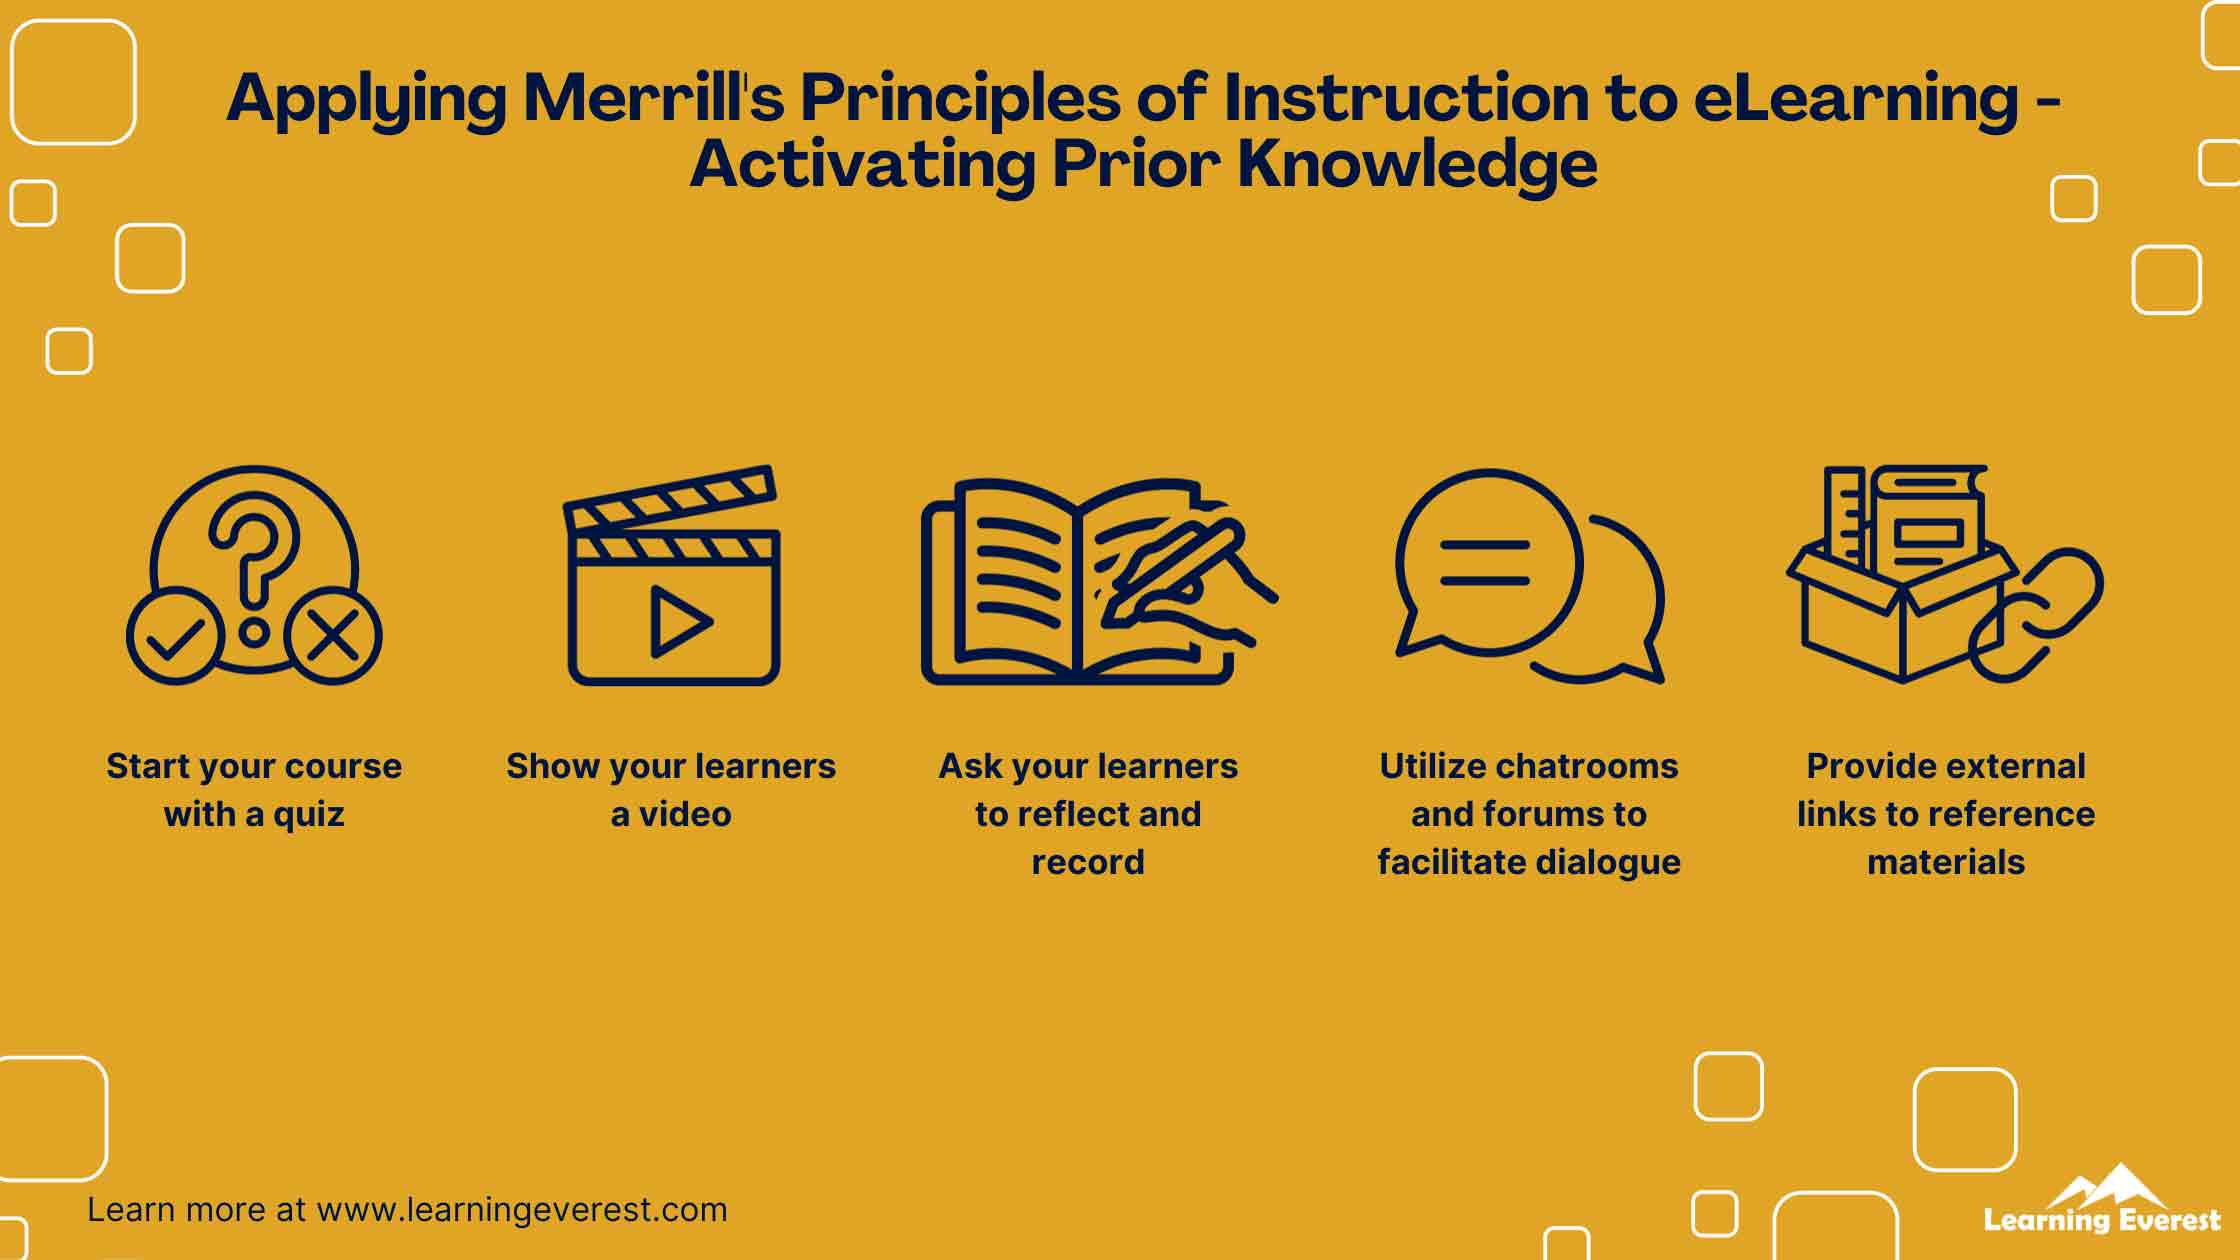 Applying Merrill's Principles of Instruction to eLearning - Activating Prior Knowledge